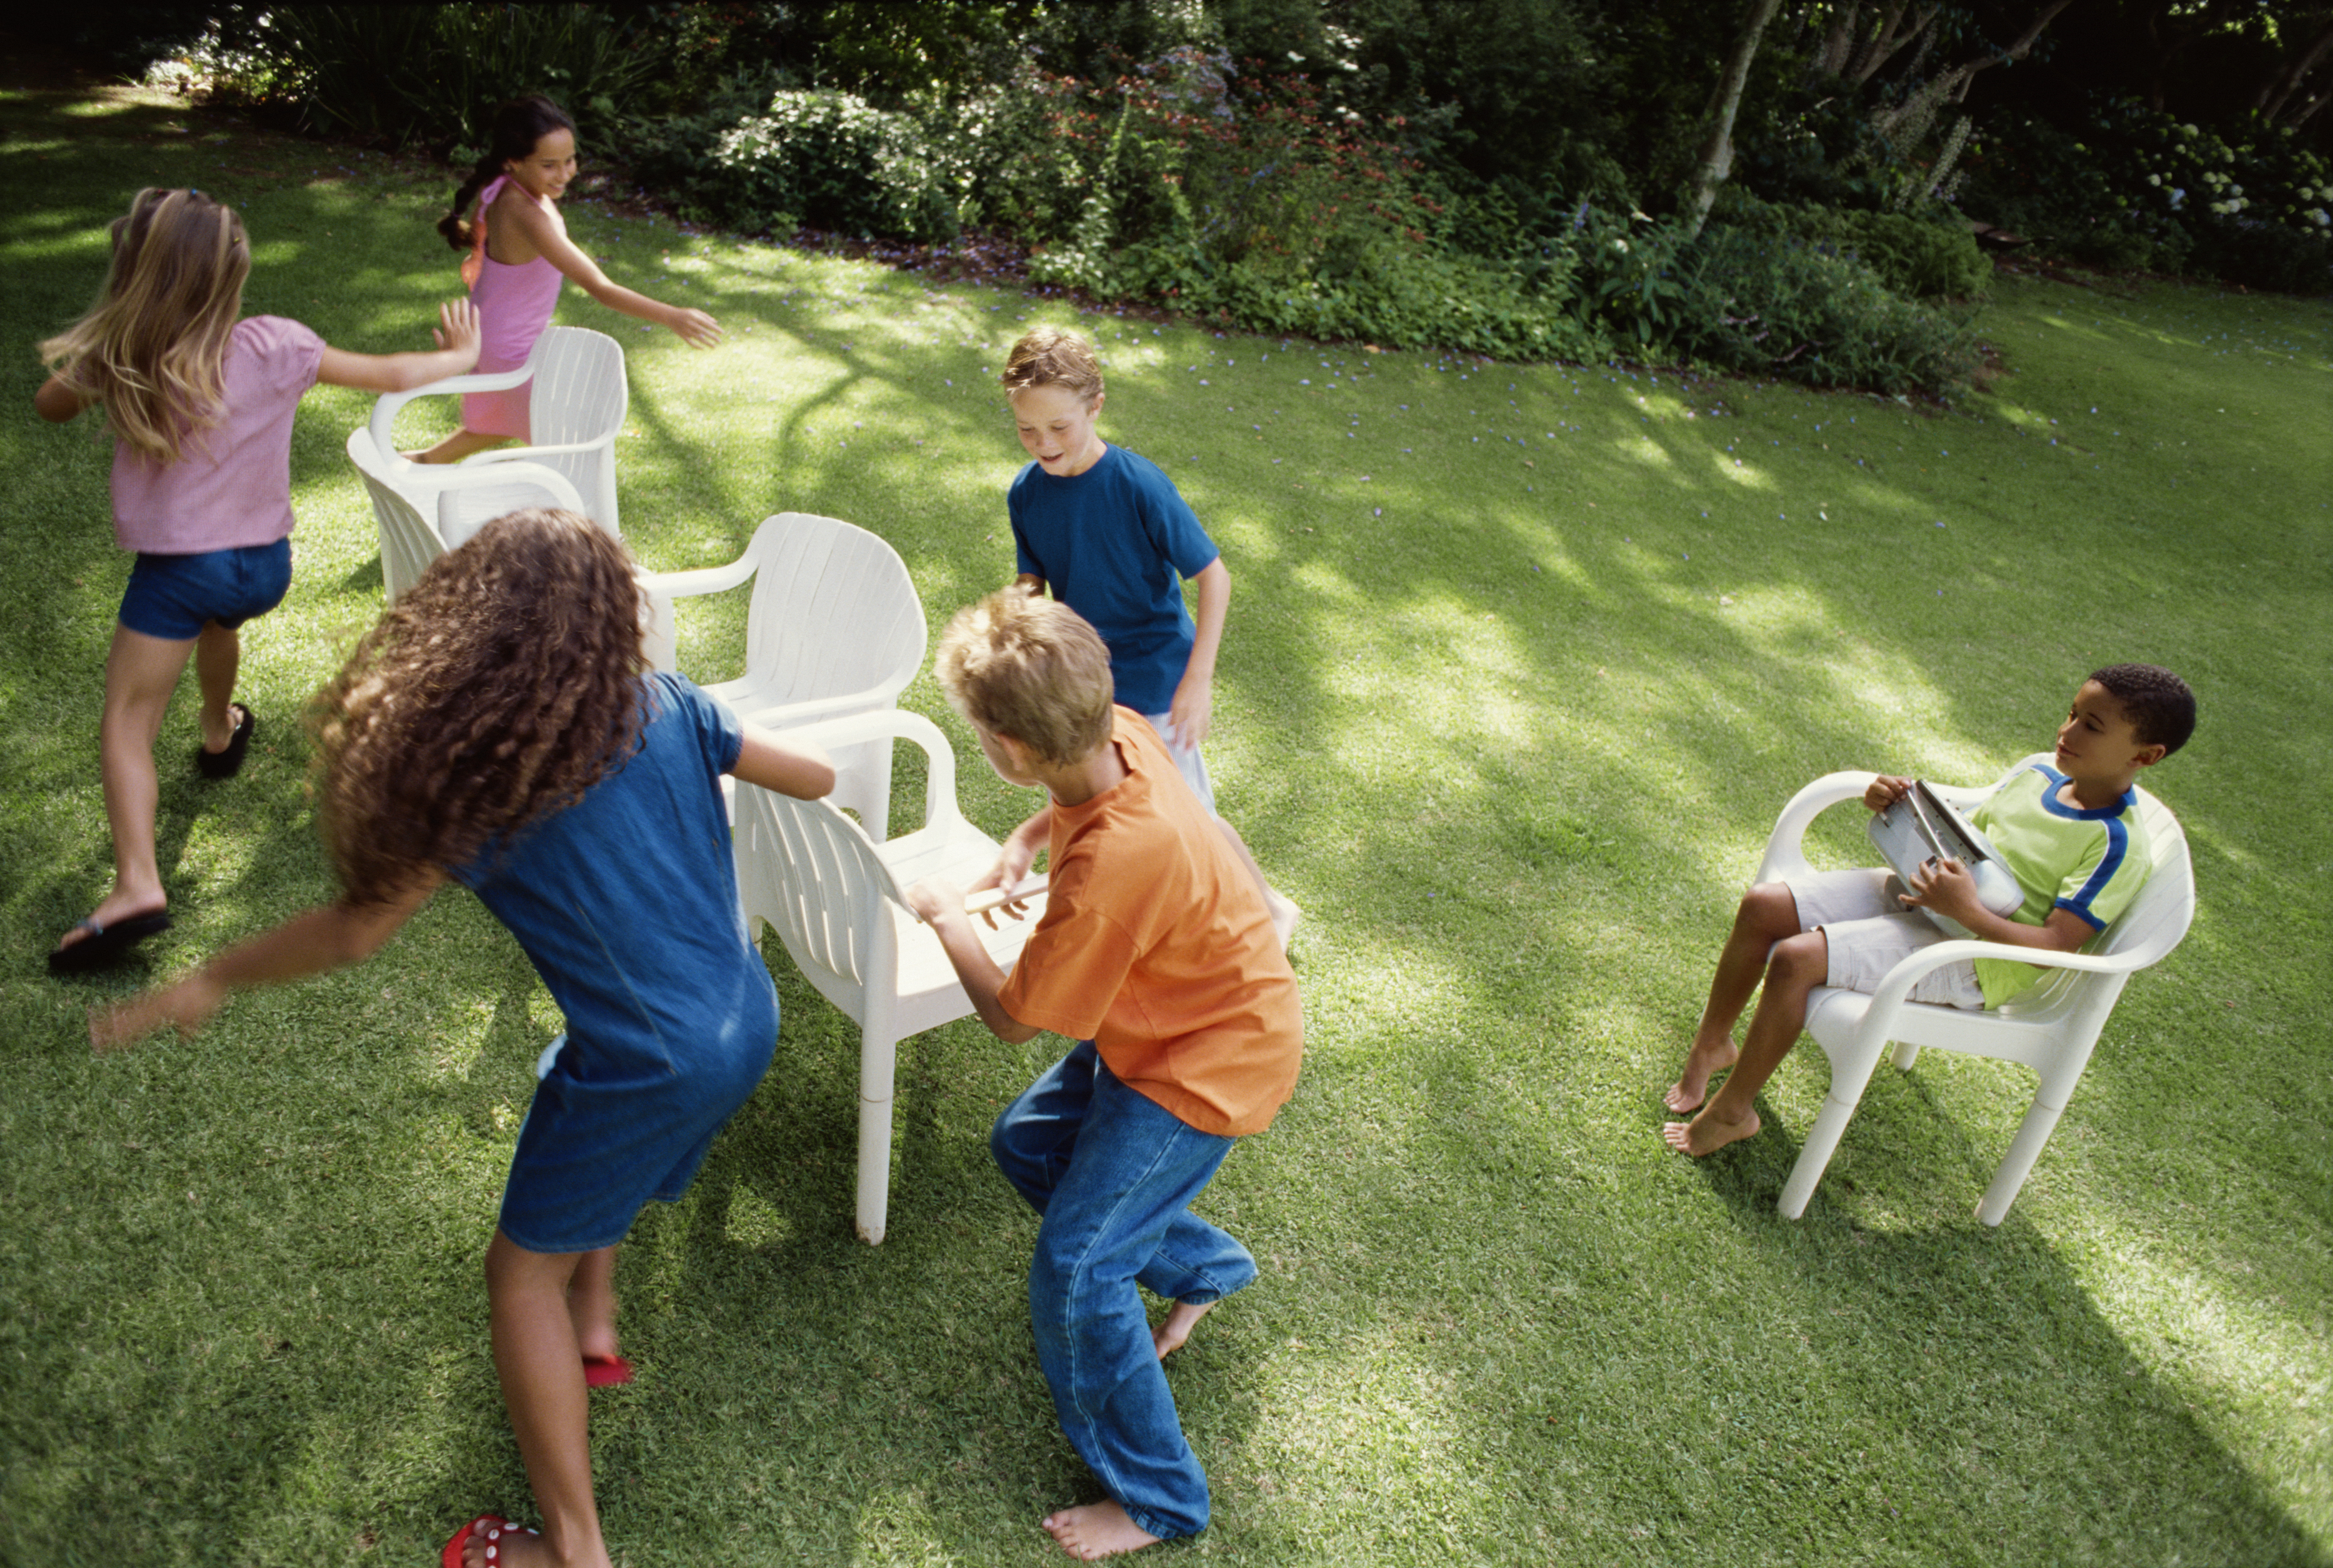 Children playing 'musical chairs' in back yard